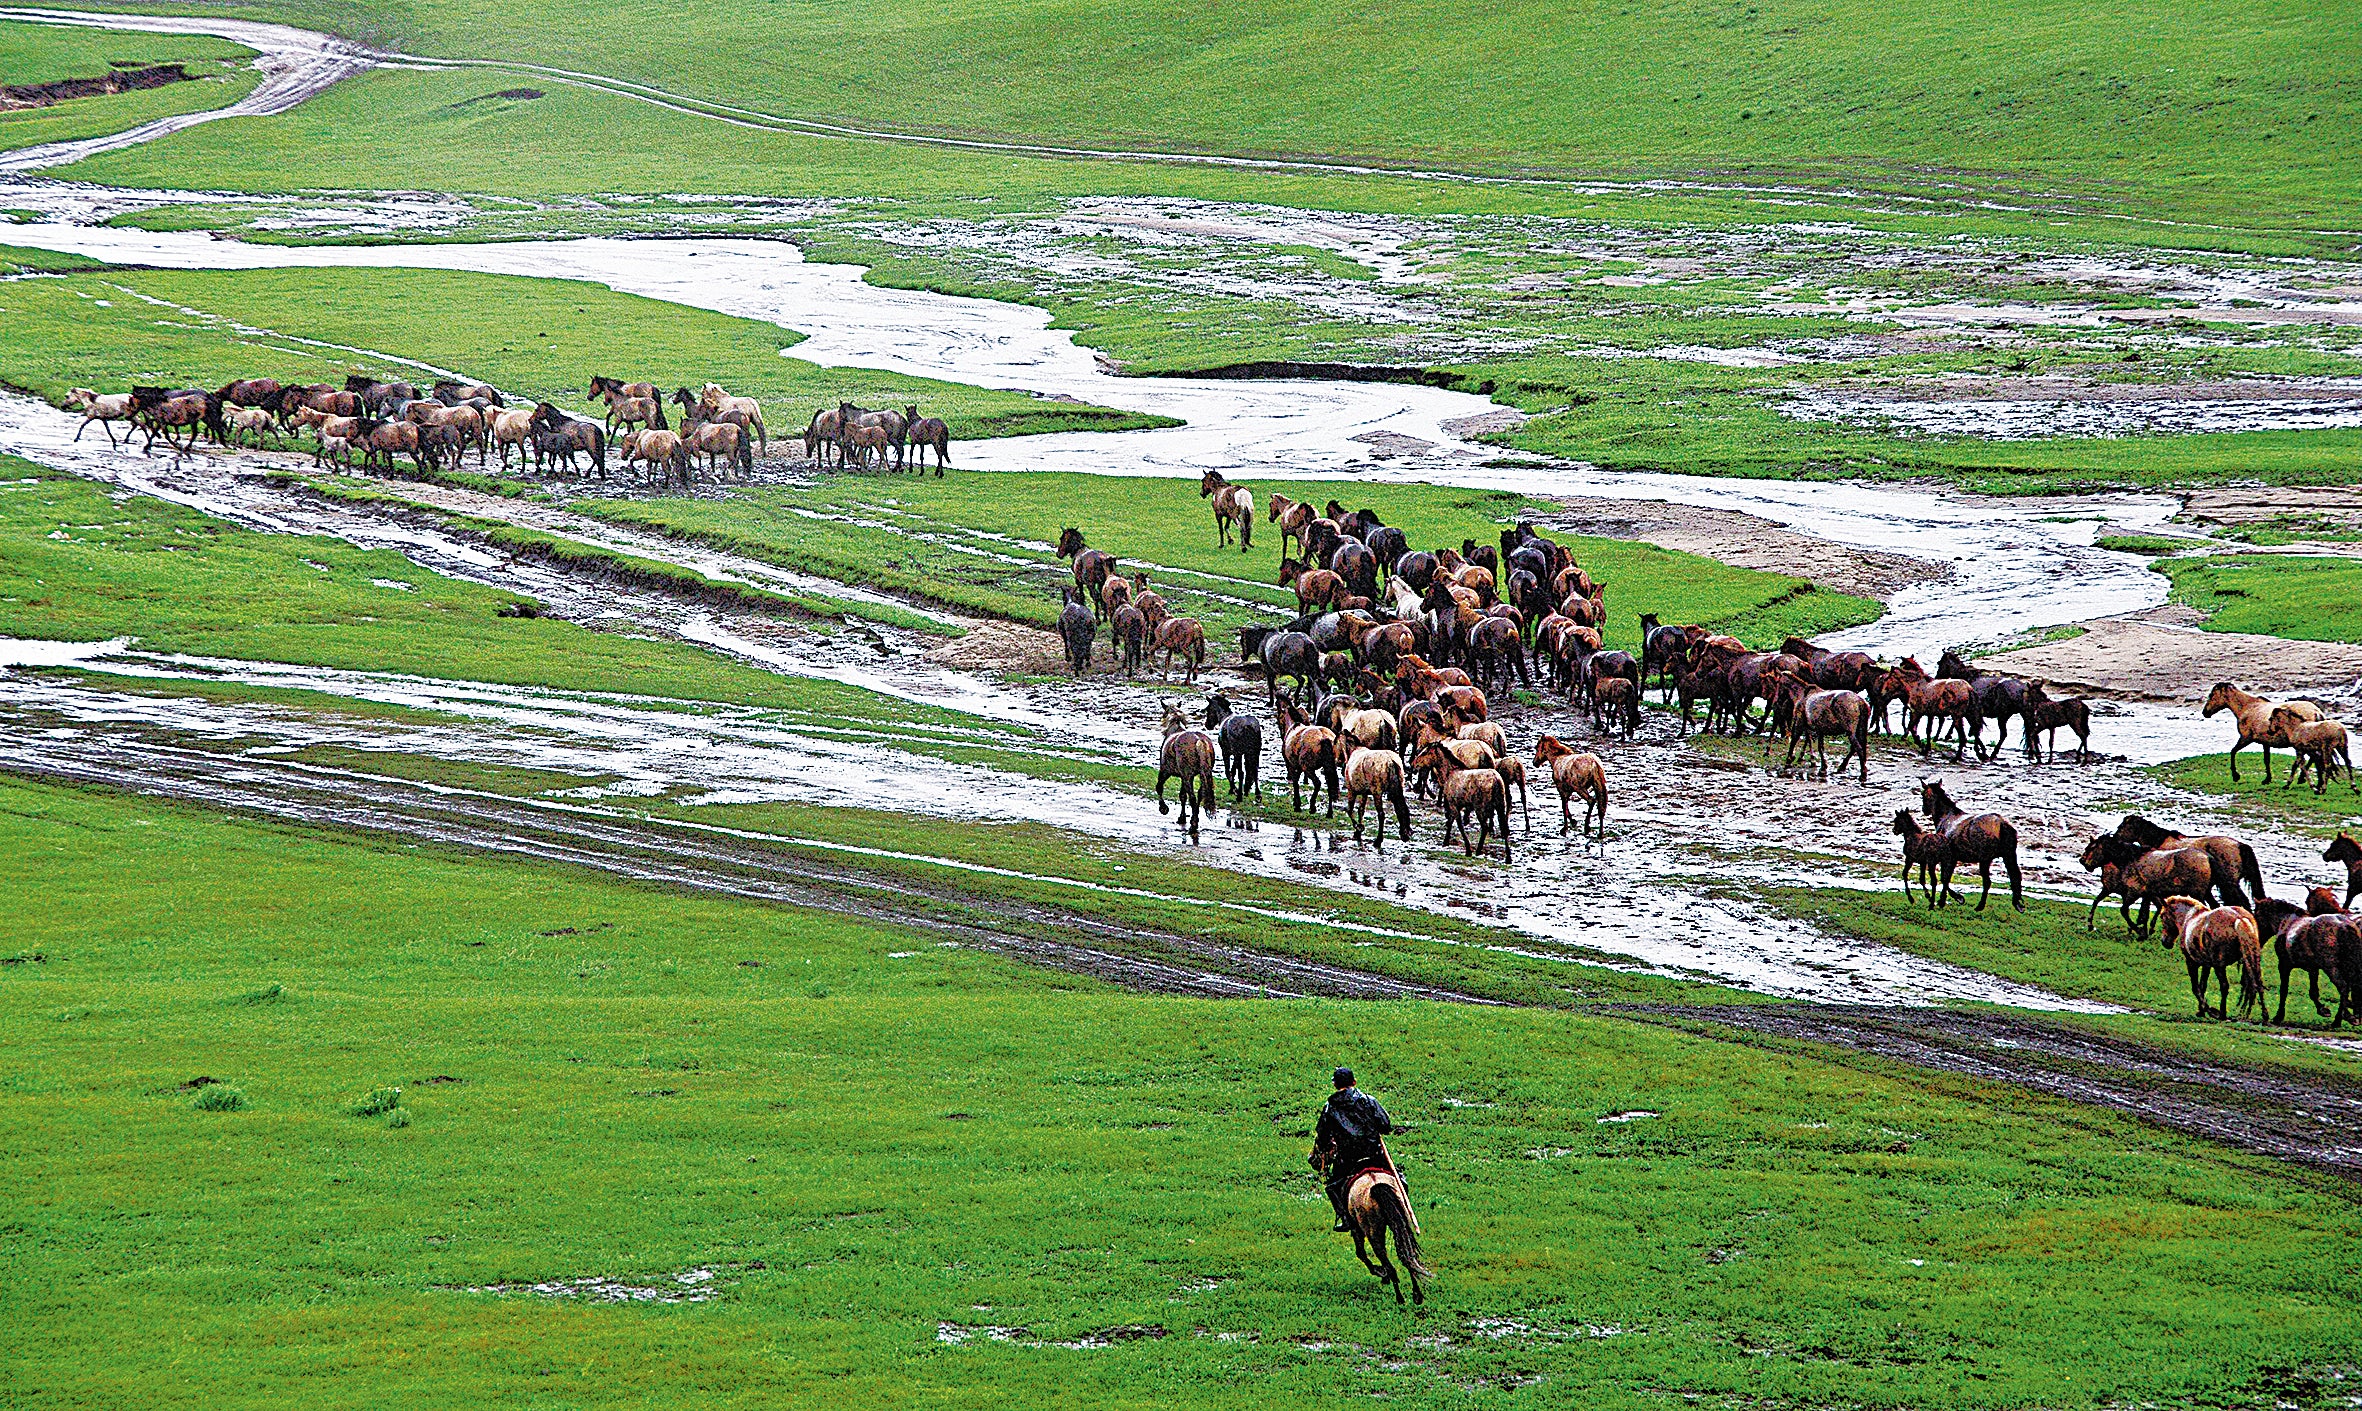 Ar Horqin Grassland Nomadic System in North China’s Inner Mongolia autonomous region demonstrates the wisdom of herdsmen to work in harmony with nature